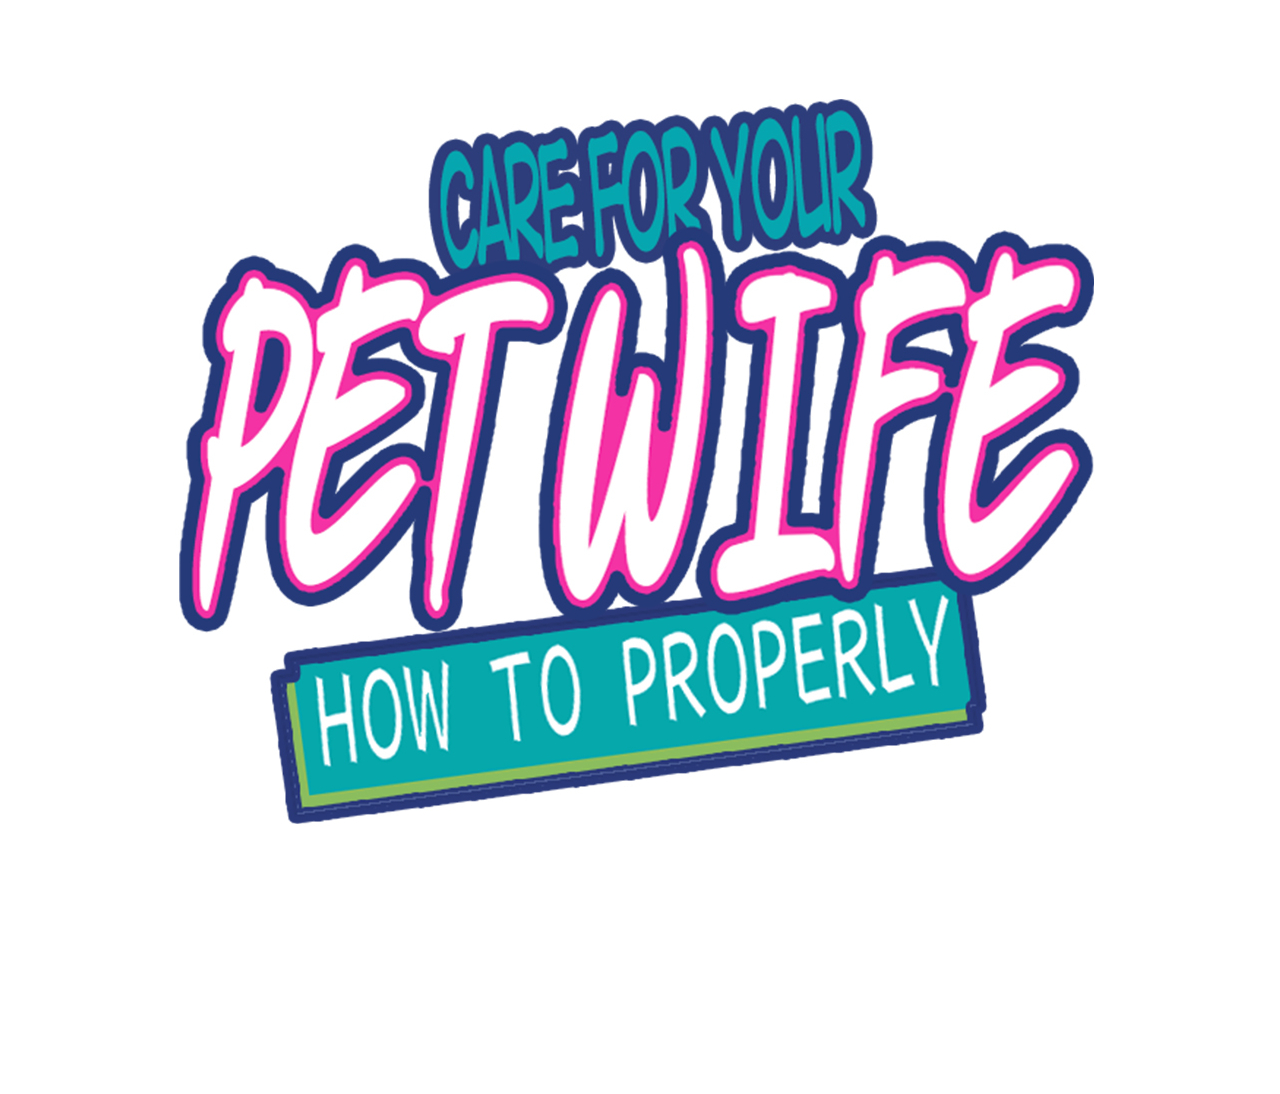 How To Properly Care For Your Pet Wife 17 A Dream Come True